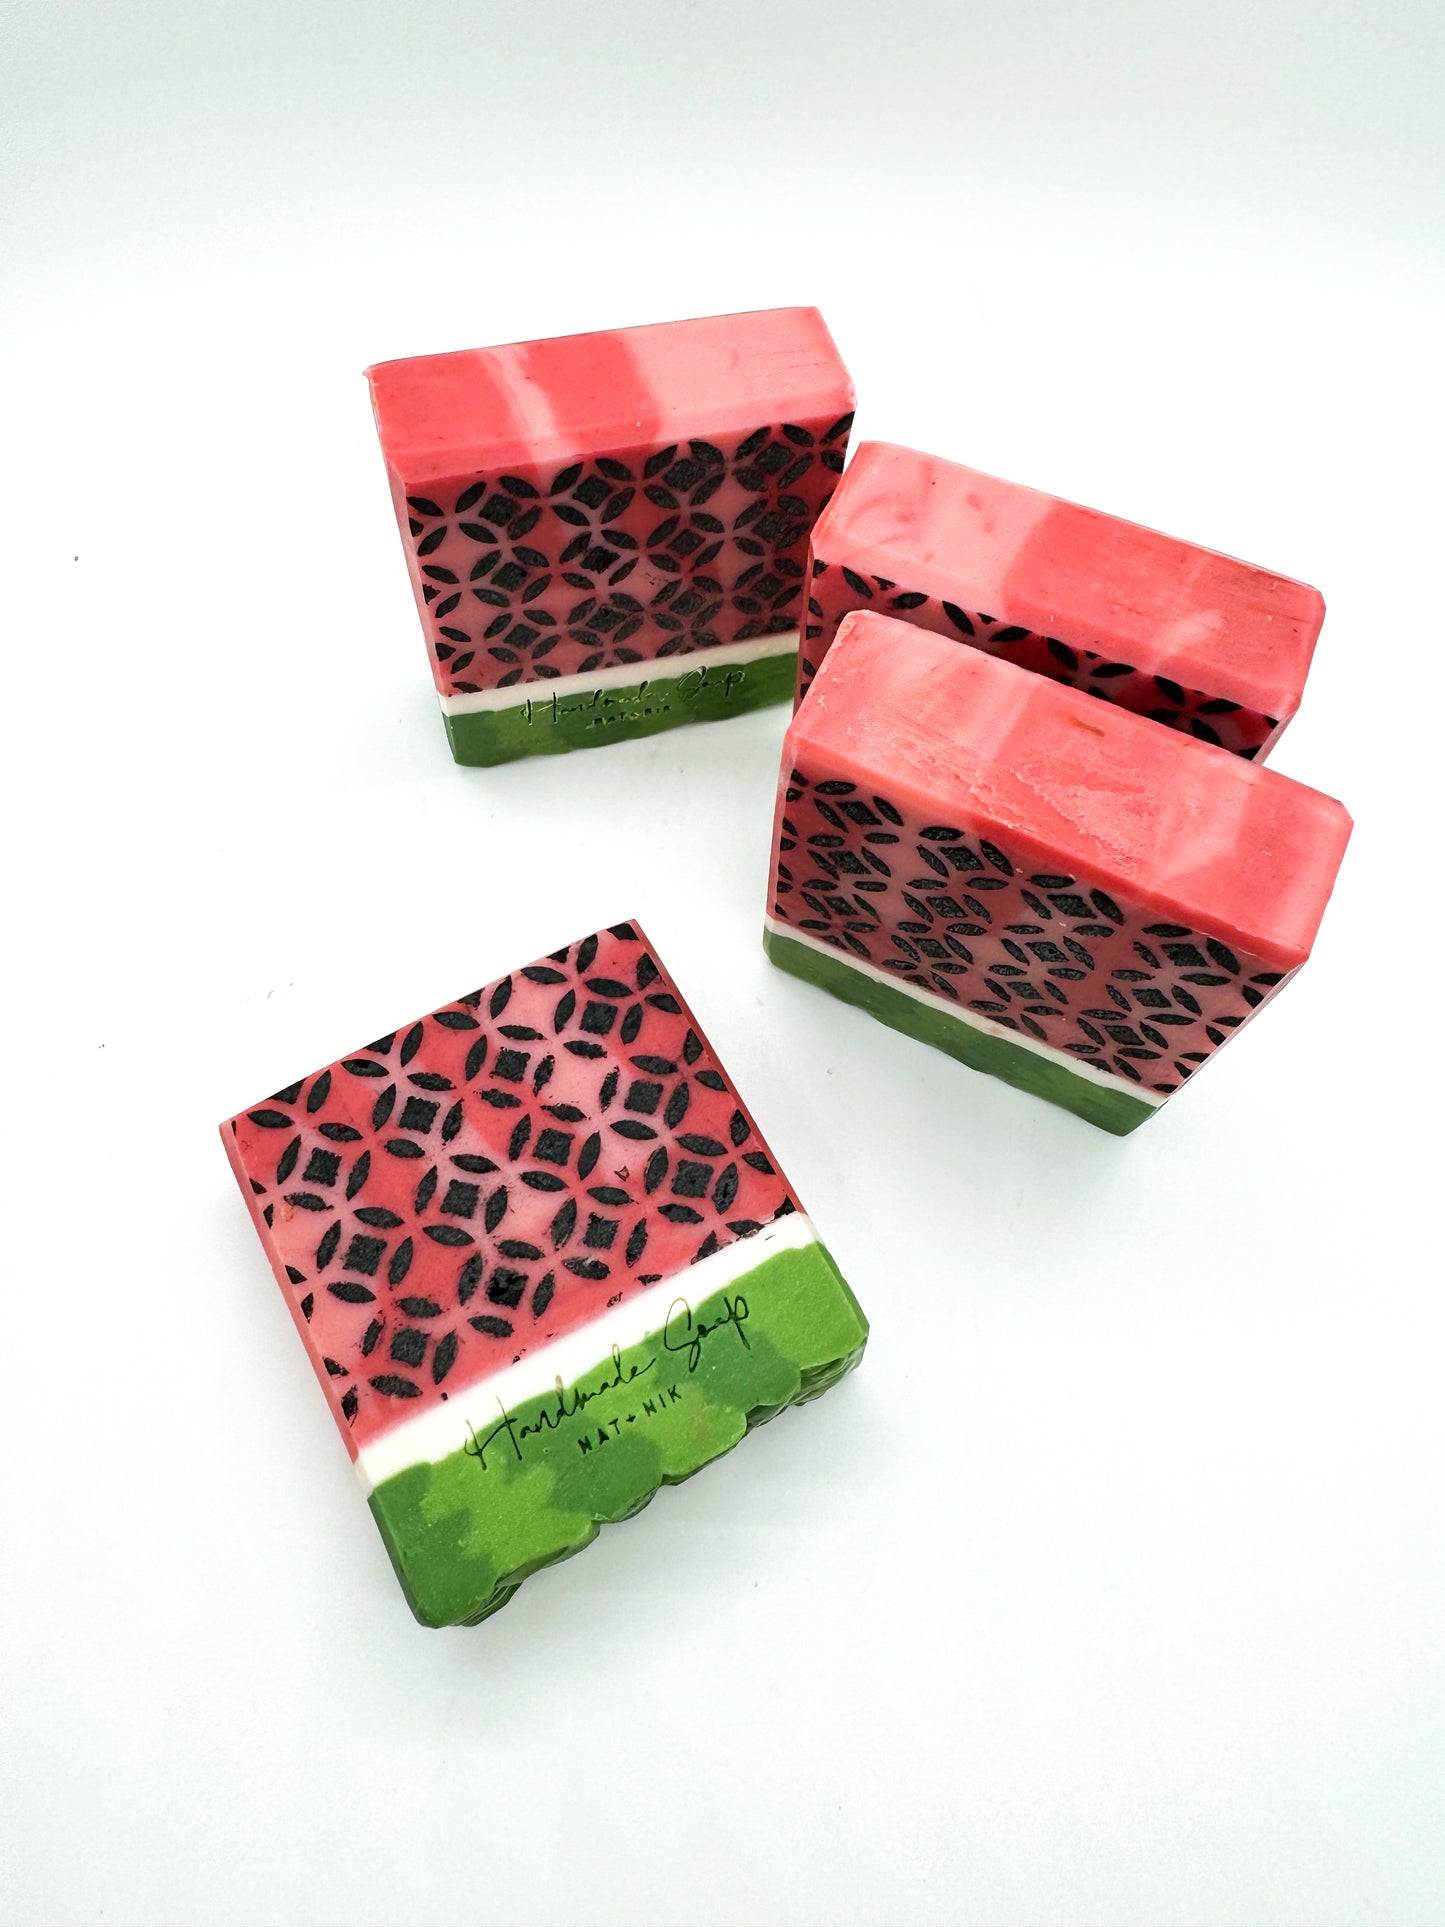 Summer 4.3 oz Watermelon Artisanal Face and Body Soap